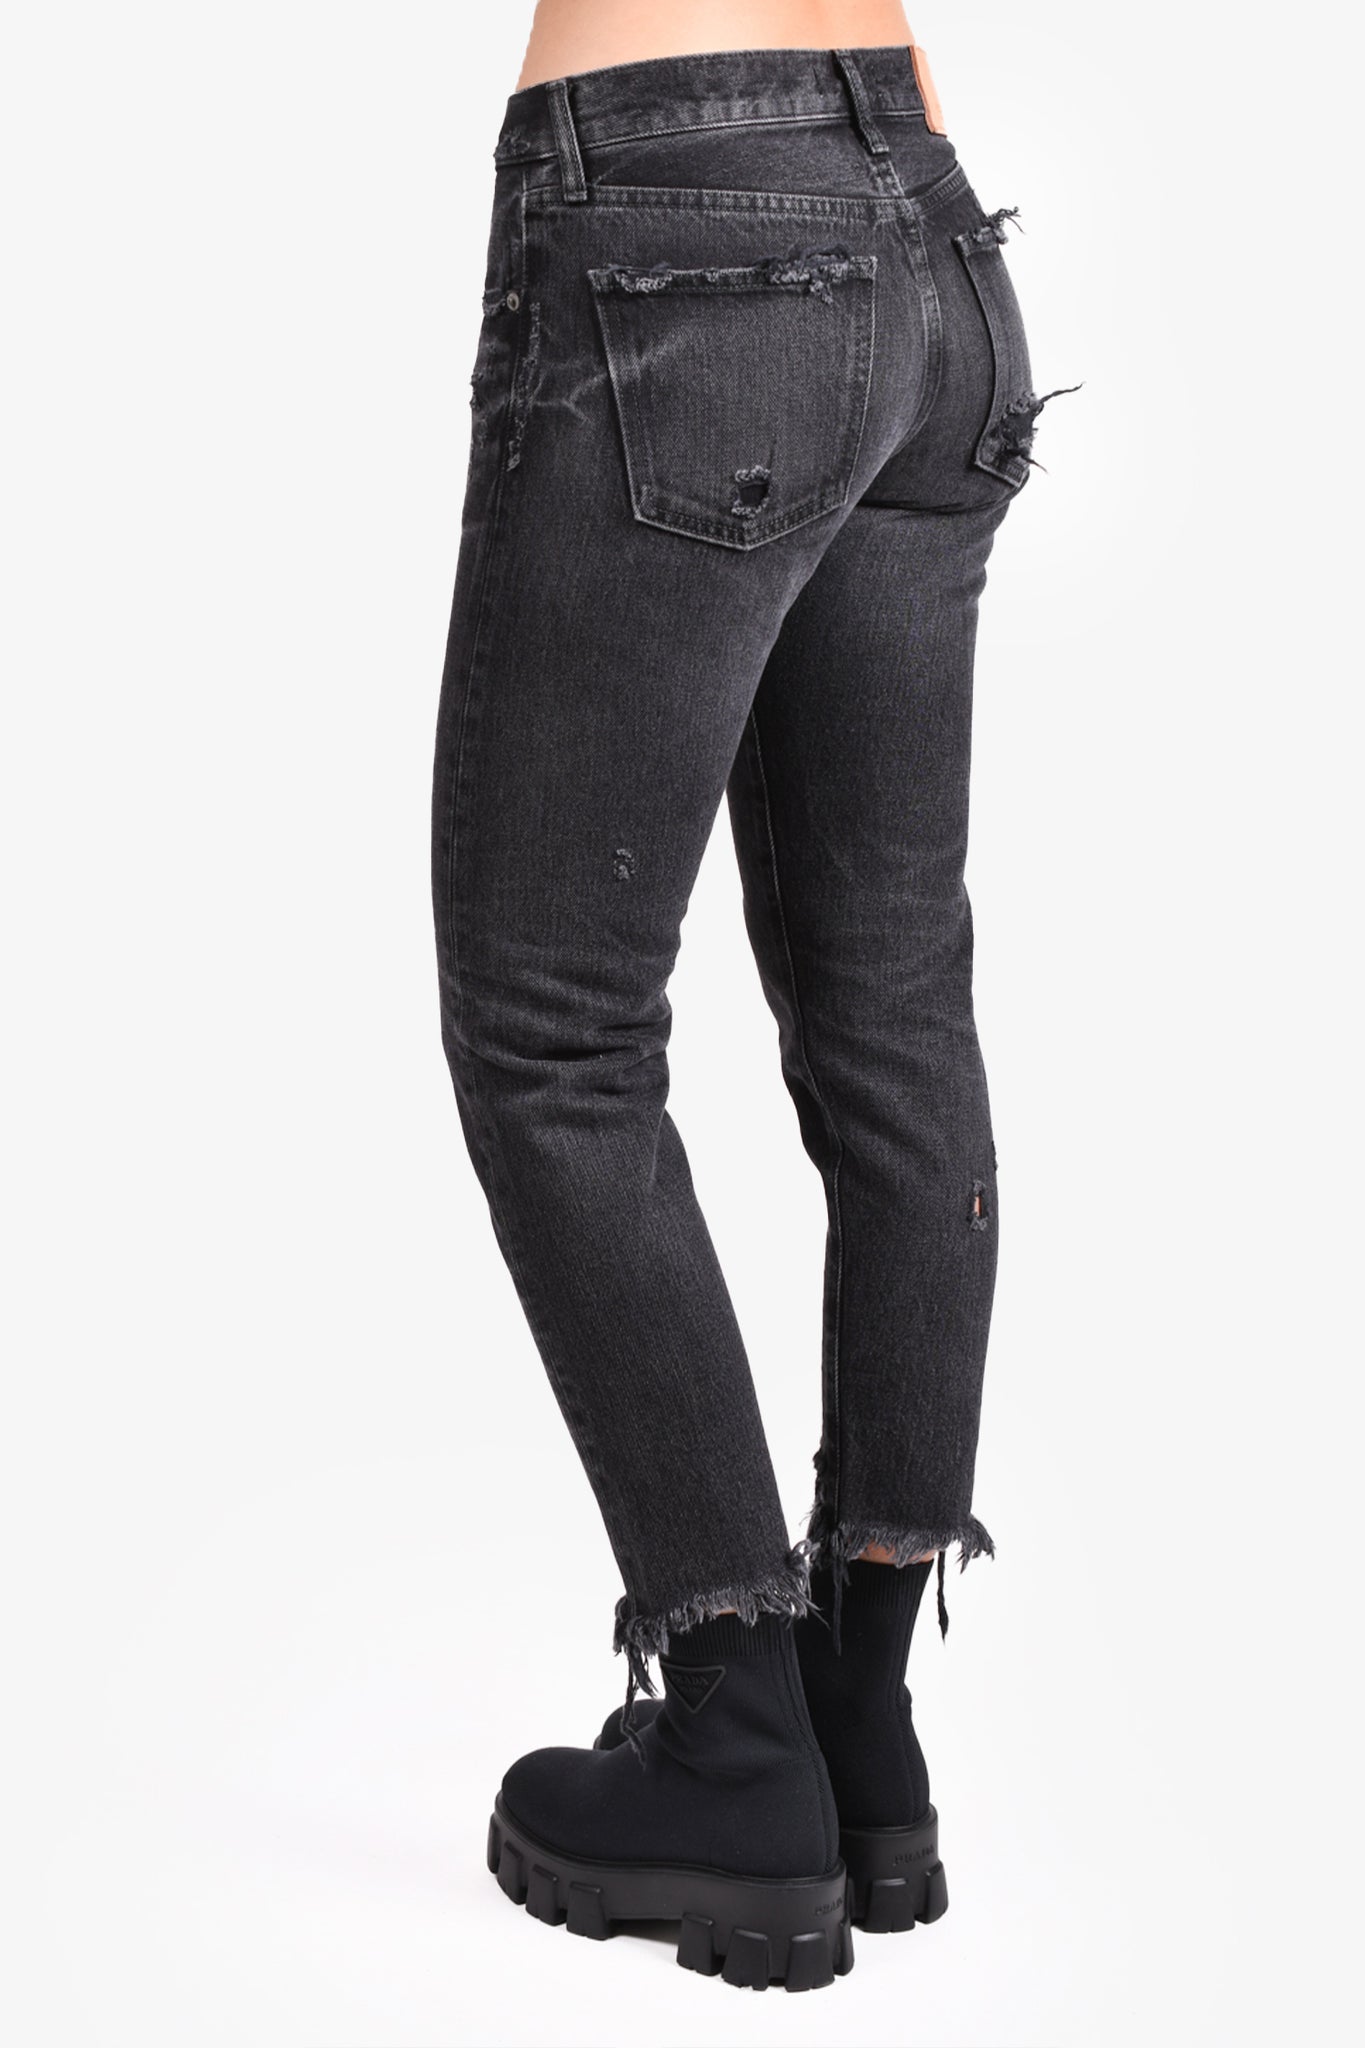 Moussy Washed Black Denim Distressed Jeans Size 26